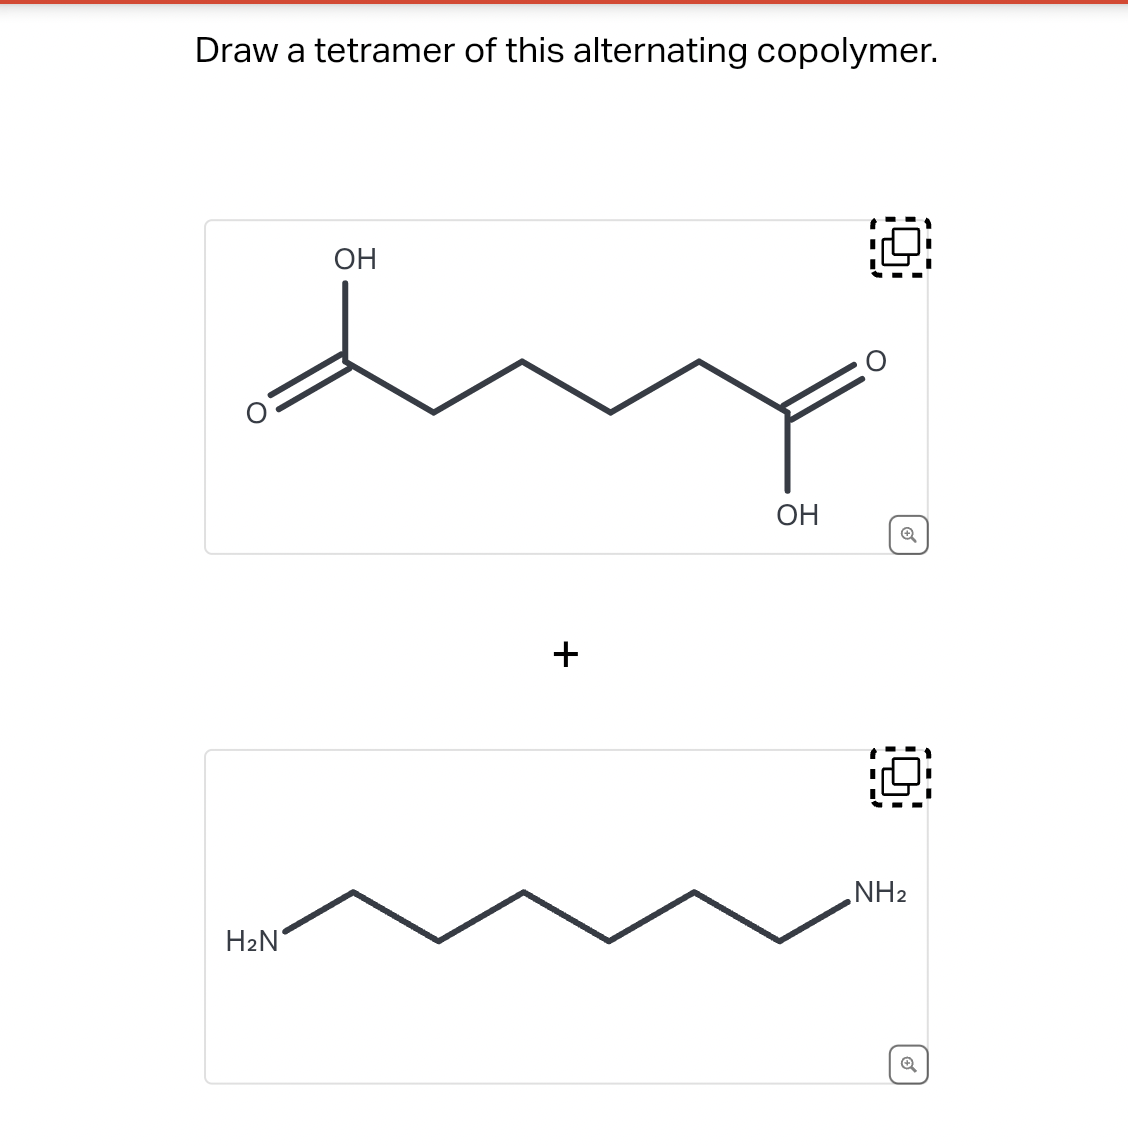 Draw a tetramer of this alternating copolymer.
H₂N
OH
+
OH
0
Q
Ⓒ
NH₂